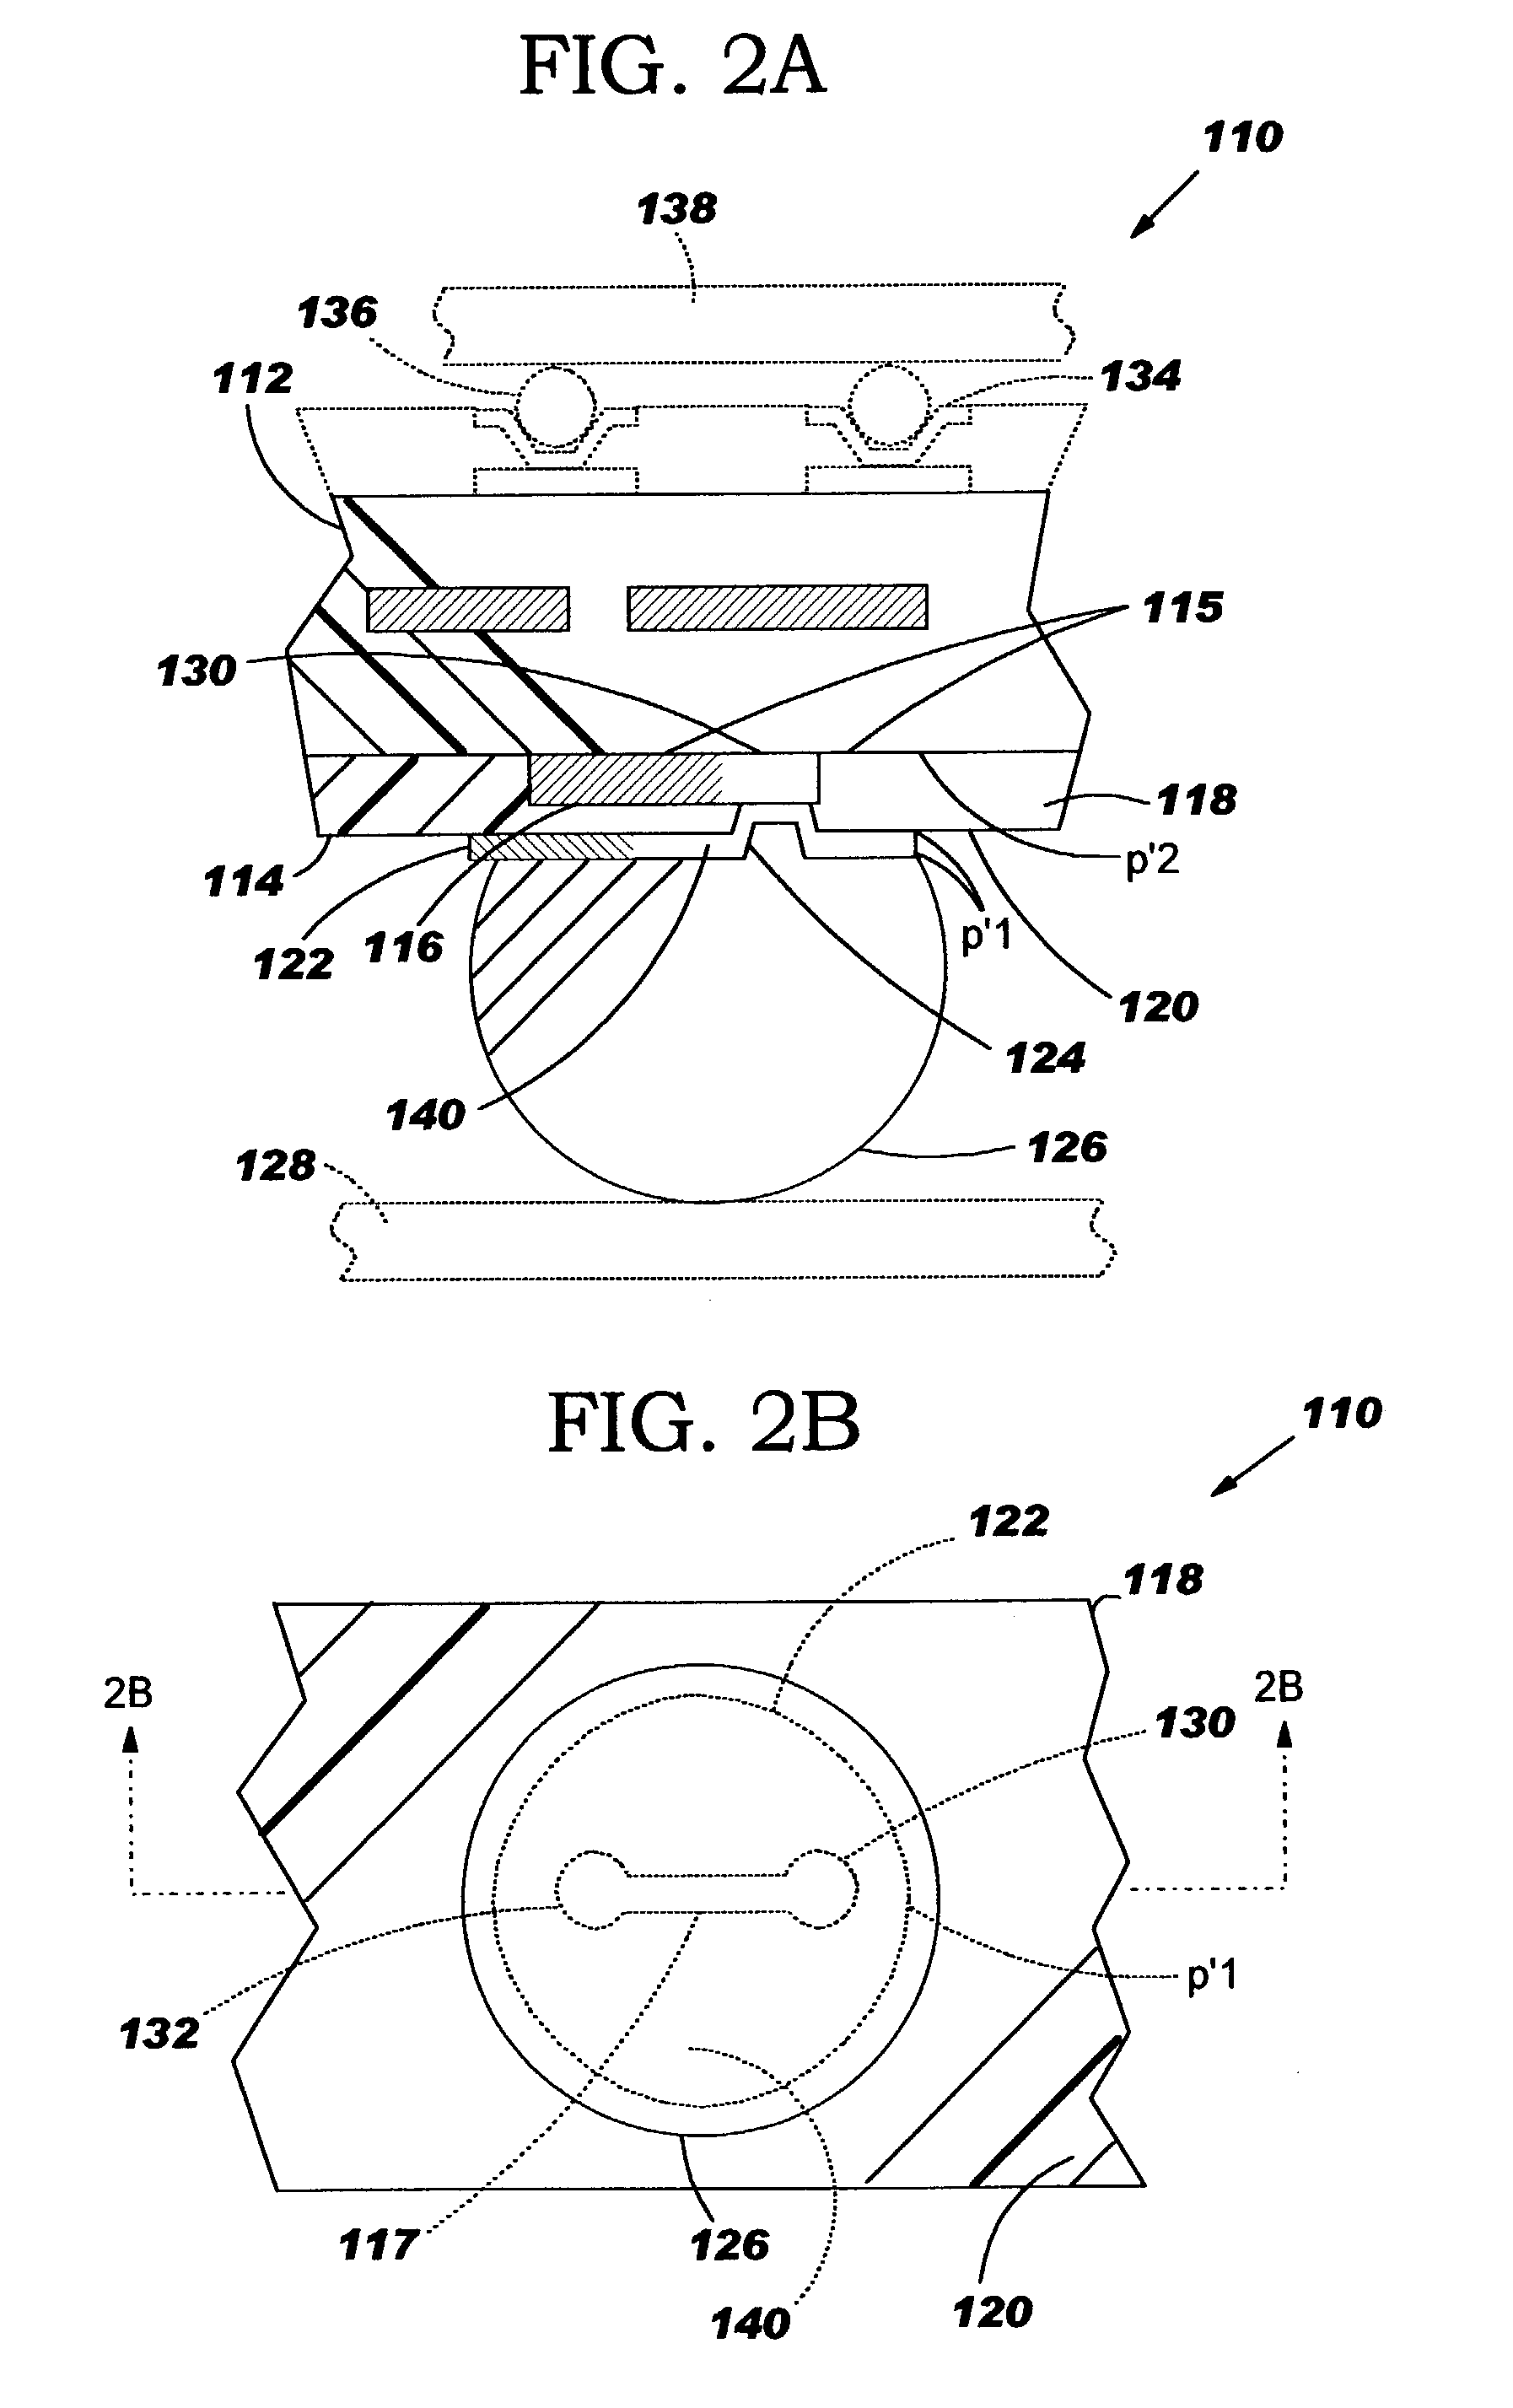 Electronic package with optimized circuitization pattern